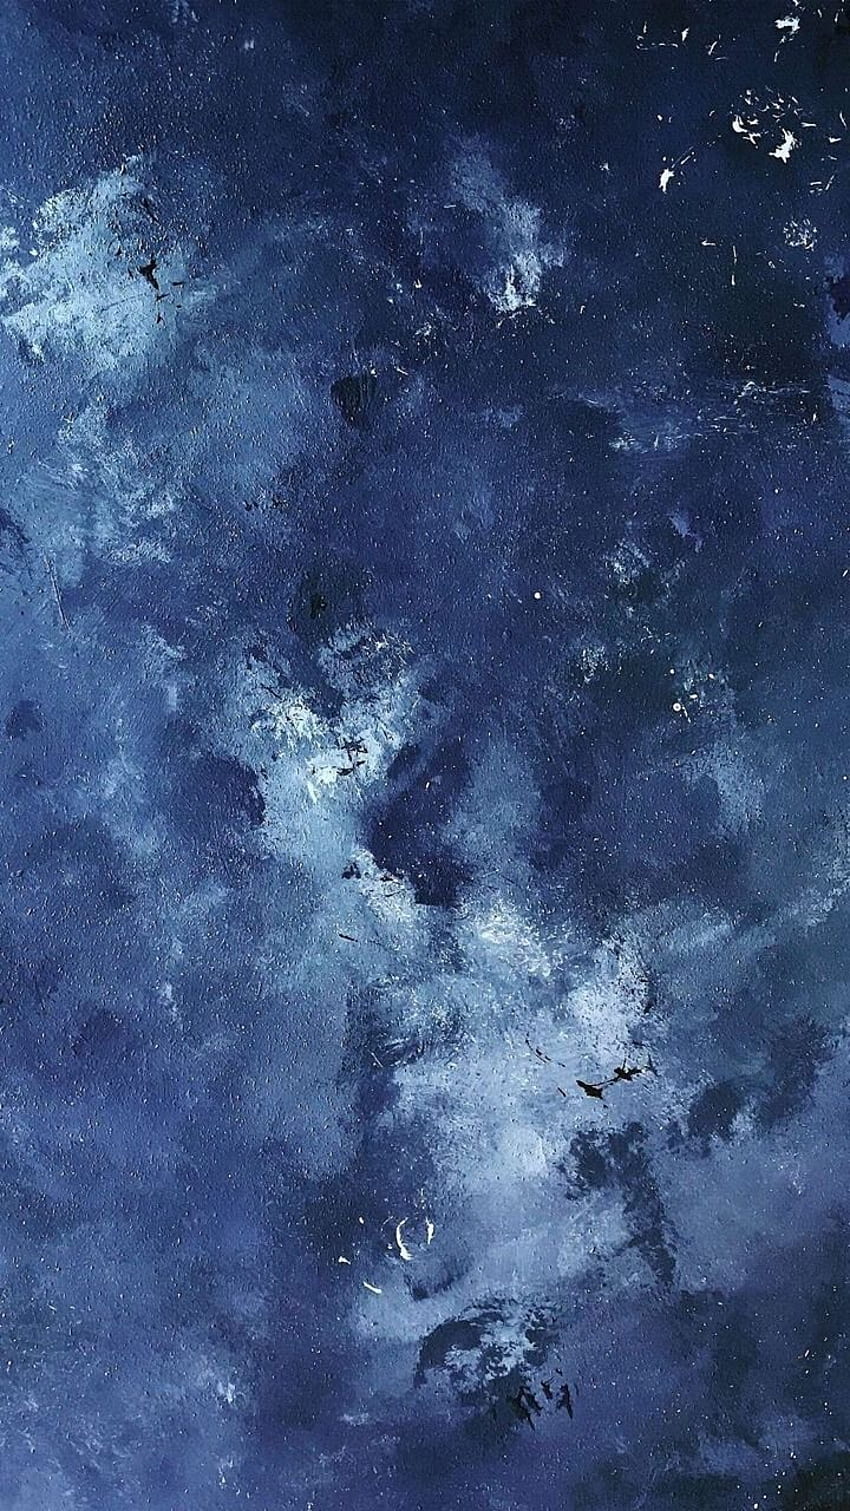 A painting of the sky with clouds - Navy blue, dark blue, watercolor